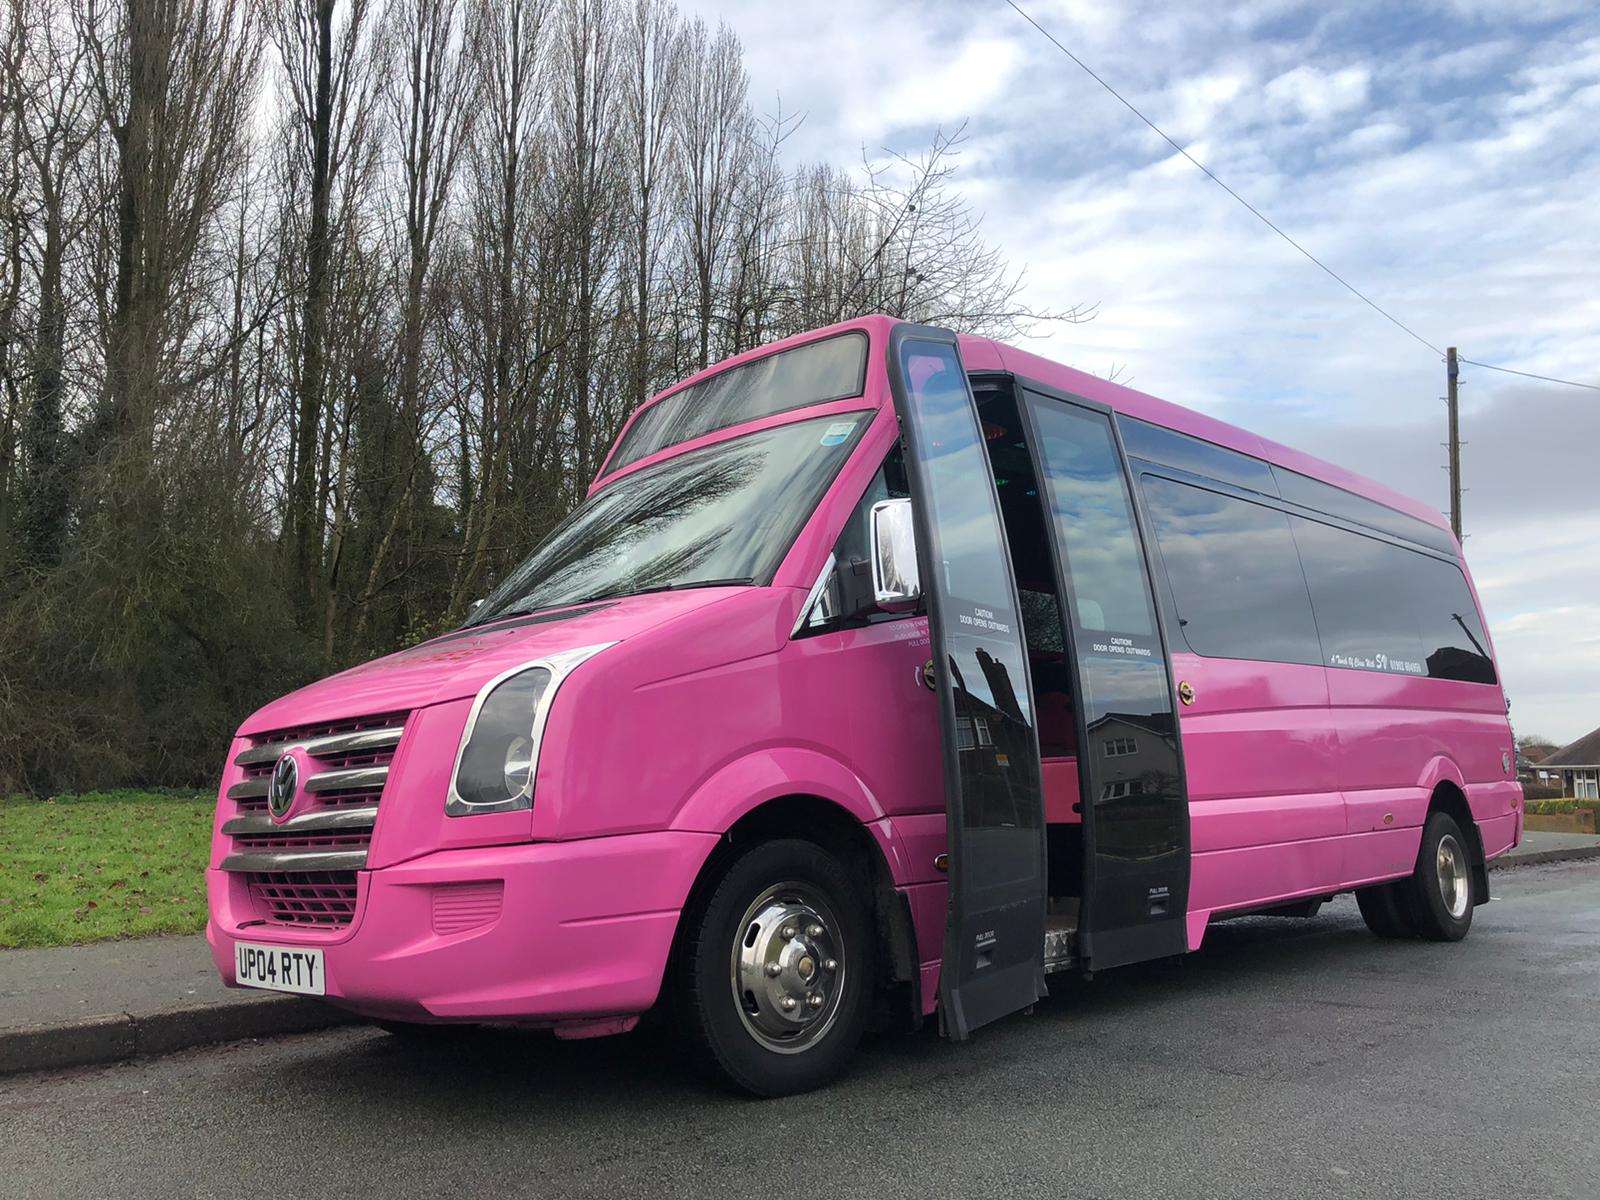 Maximising Fun: Unique Features to Look for in a West Sussex Party Bus Hire